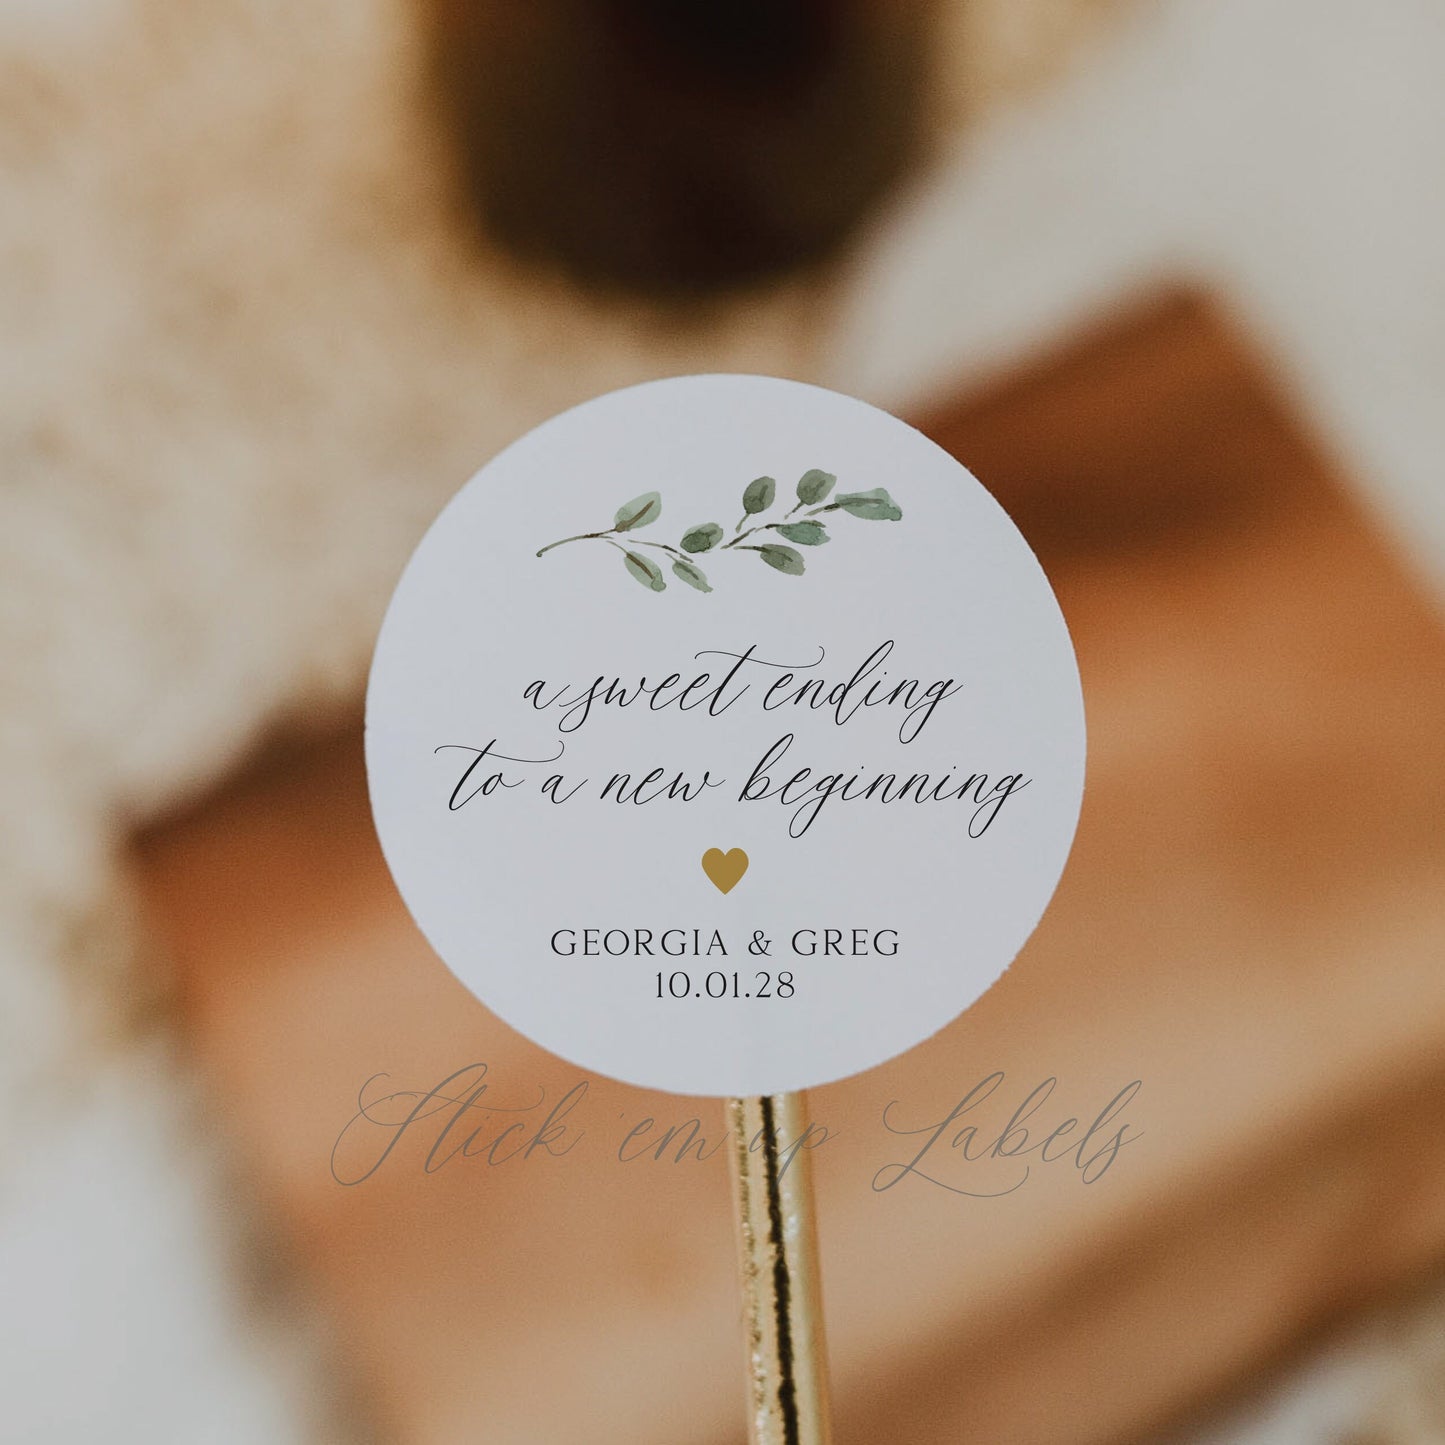 A Sweet Ending to a New Beginning Stickers - Greenery Wedding Sticker, Wedding Favor Sticker, Botanical Wedding Sticker, Thank You Stickers